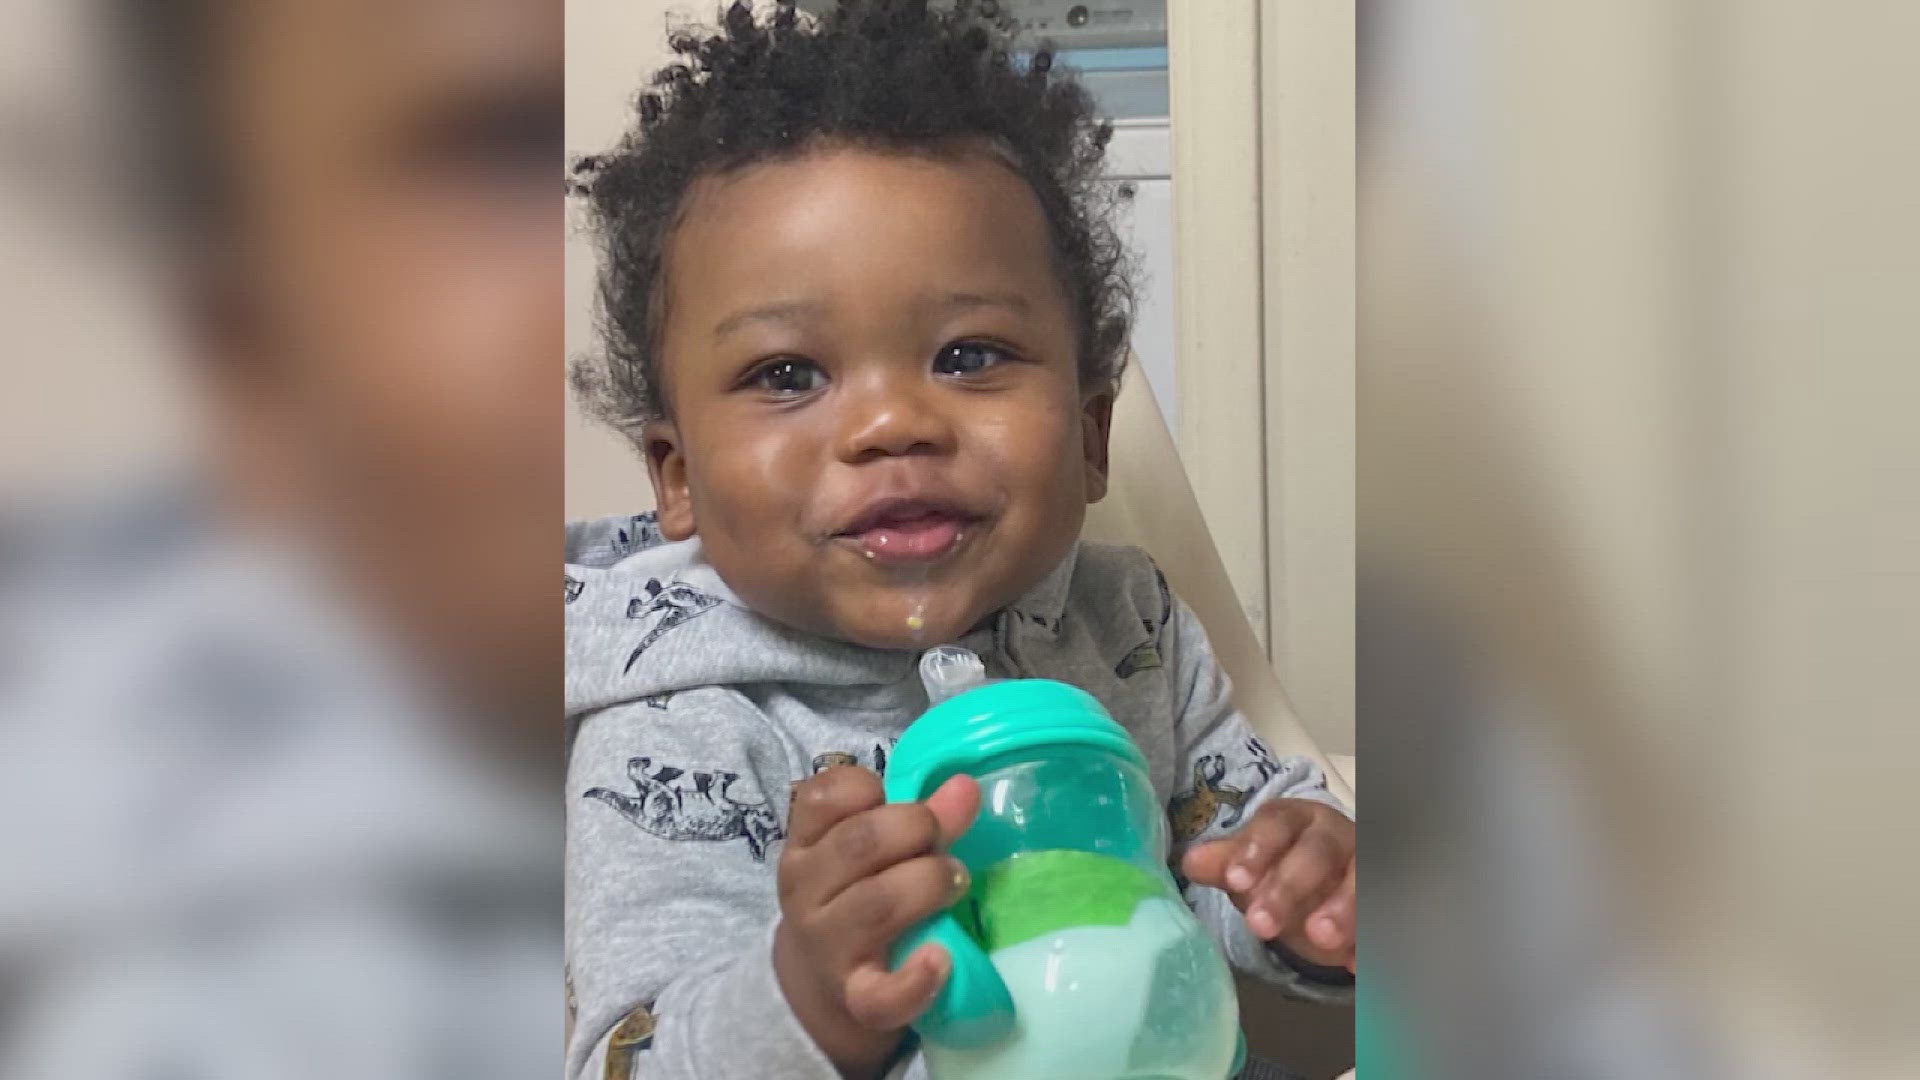 During a hearing Thursday, a Judge ruled the center will remain closed for 21 days. The parents of the toddler say they hope they can "stay permanently closed."